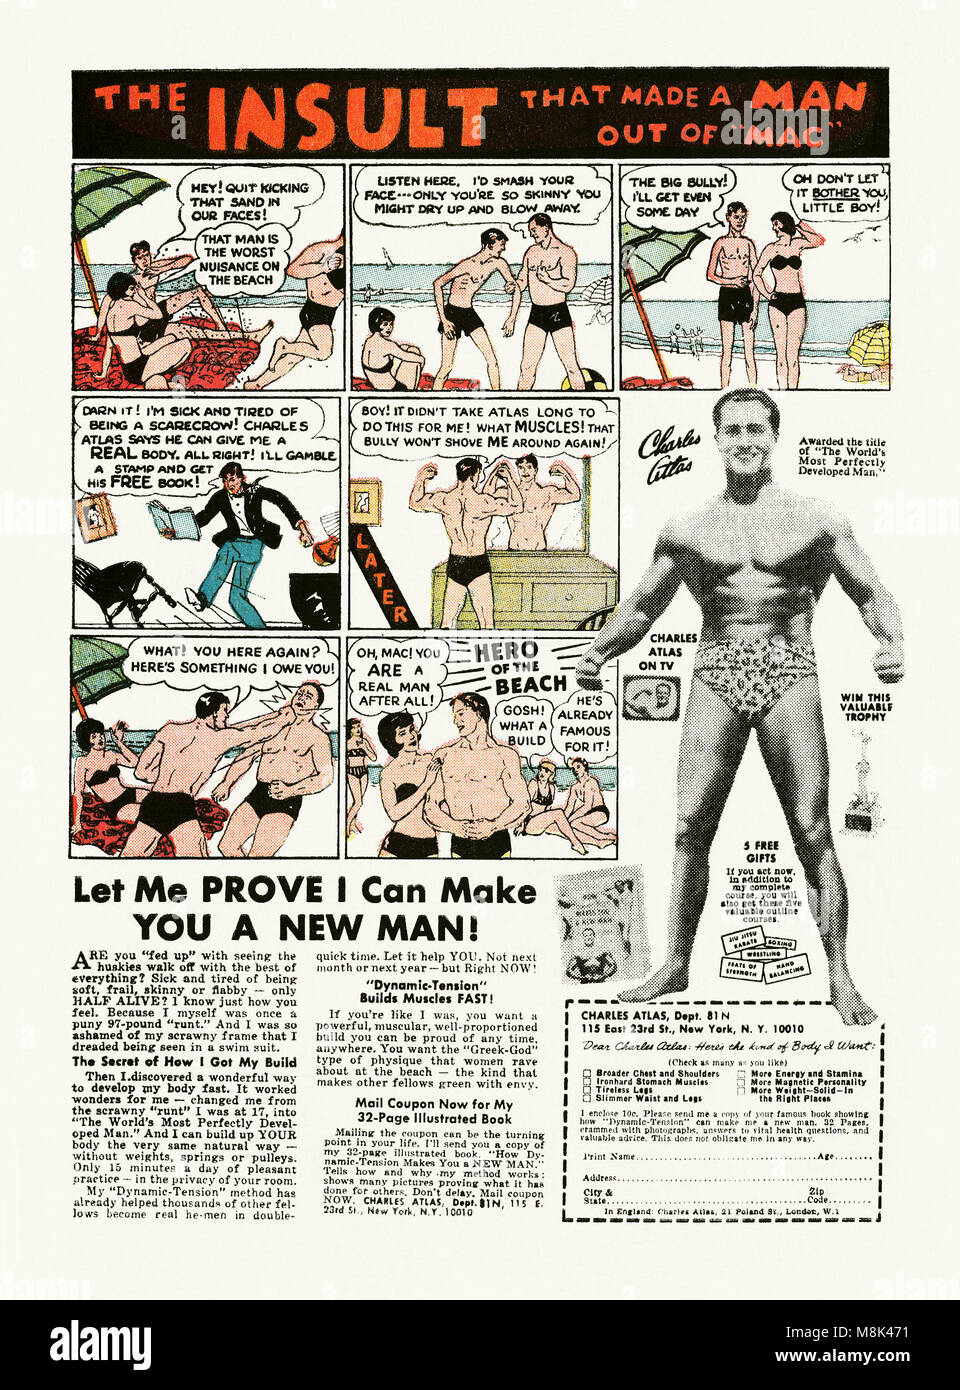 Charles Atlas Man Picked On Bodybuilding Course 1998 Vintage Print Ad